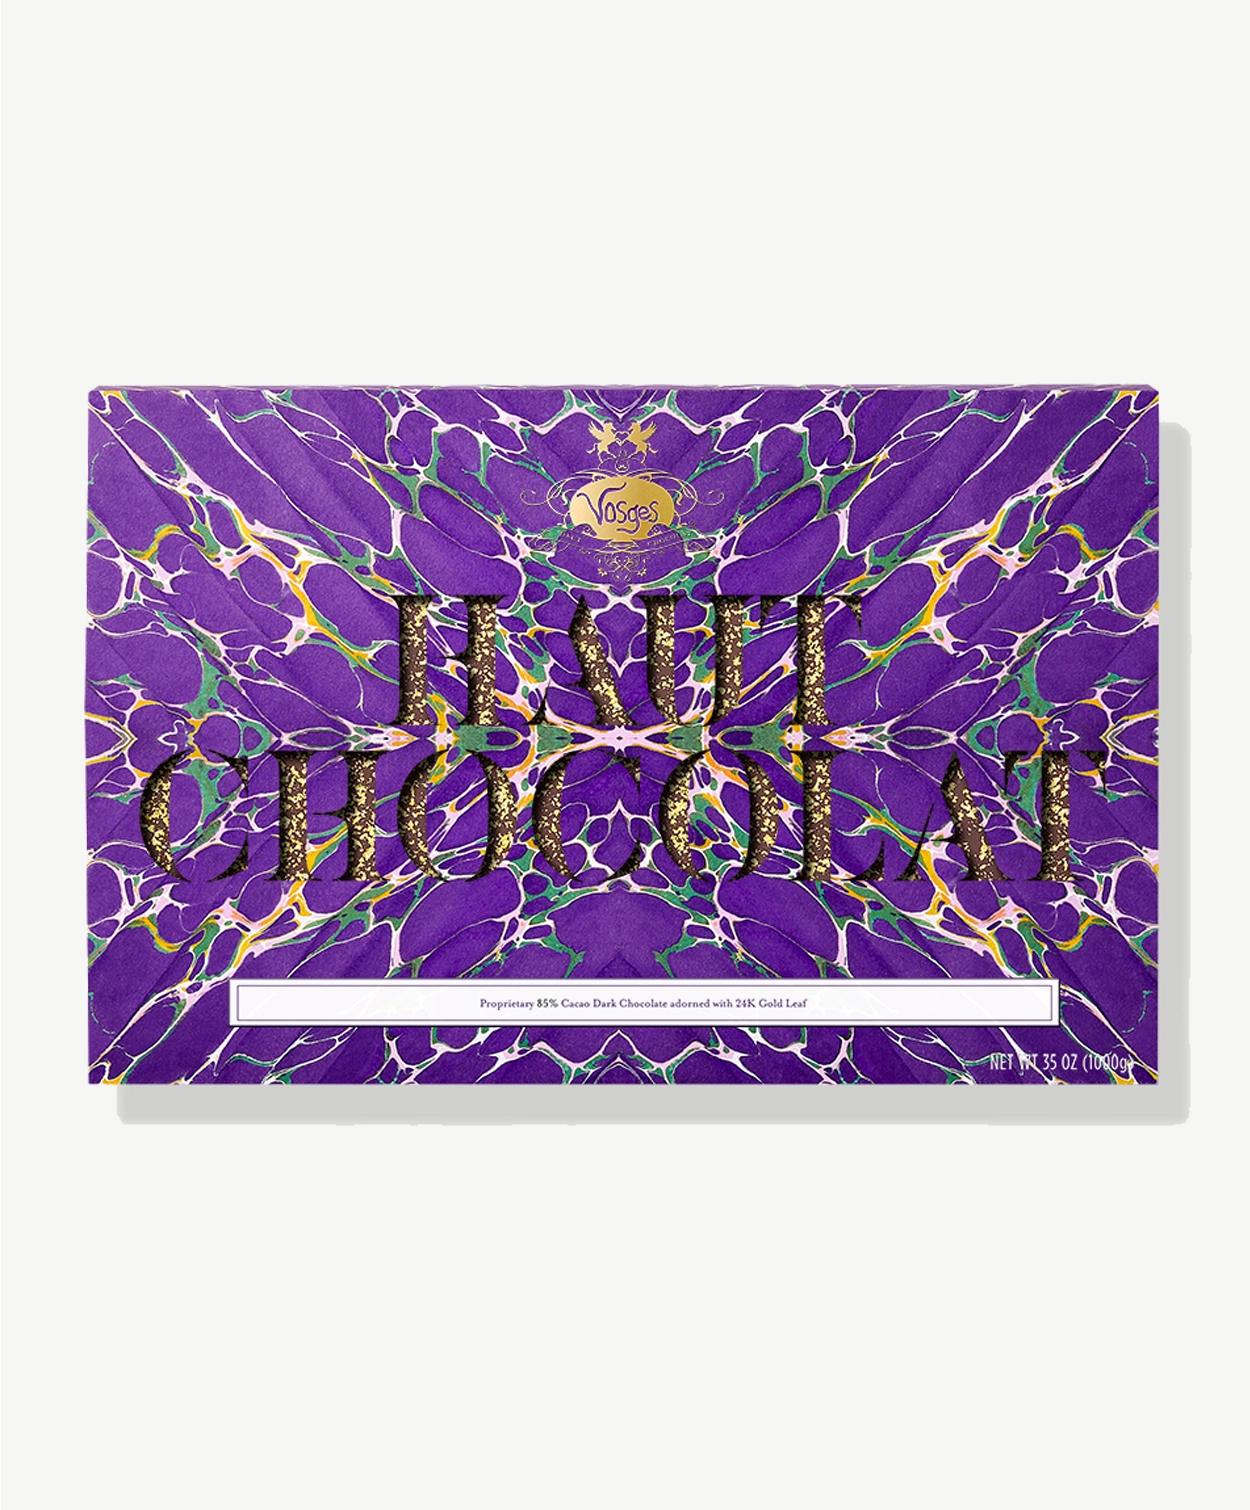 Large two pound slab of Vosges Choclate wrapped in a bright purple psychedelic wrapper reading, "Haut-Chocolat" 